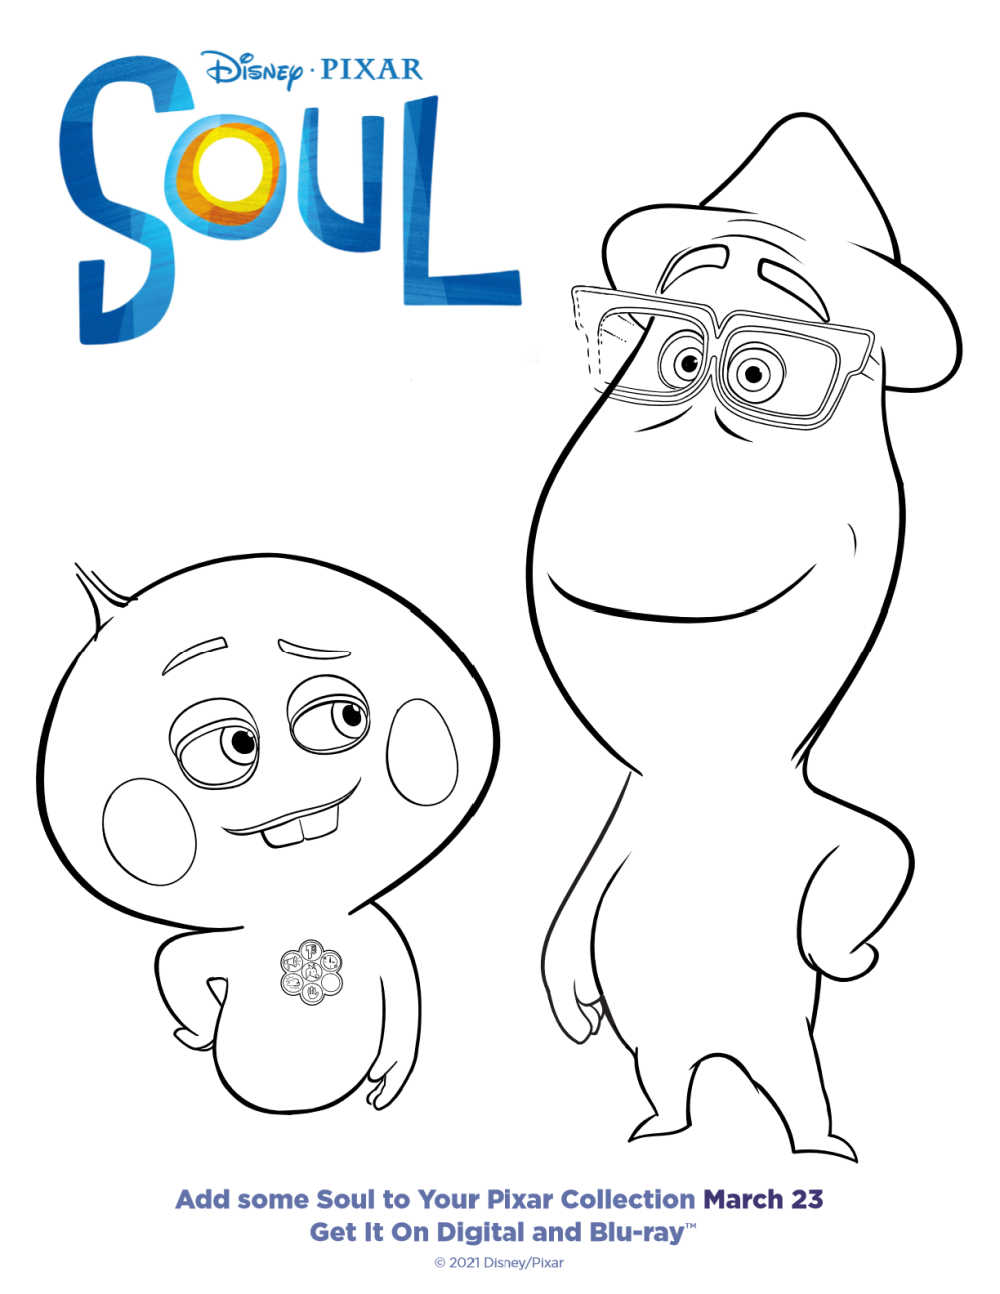 Your kids will have fun, when you download and print this Disney Pixar Soul coloring page featuring the stars of the movie. 